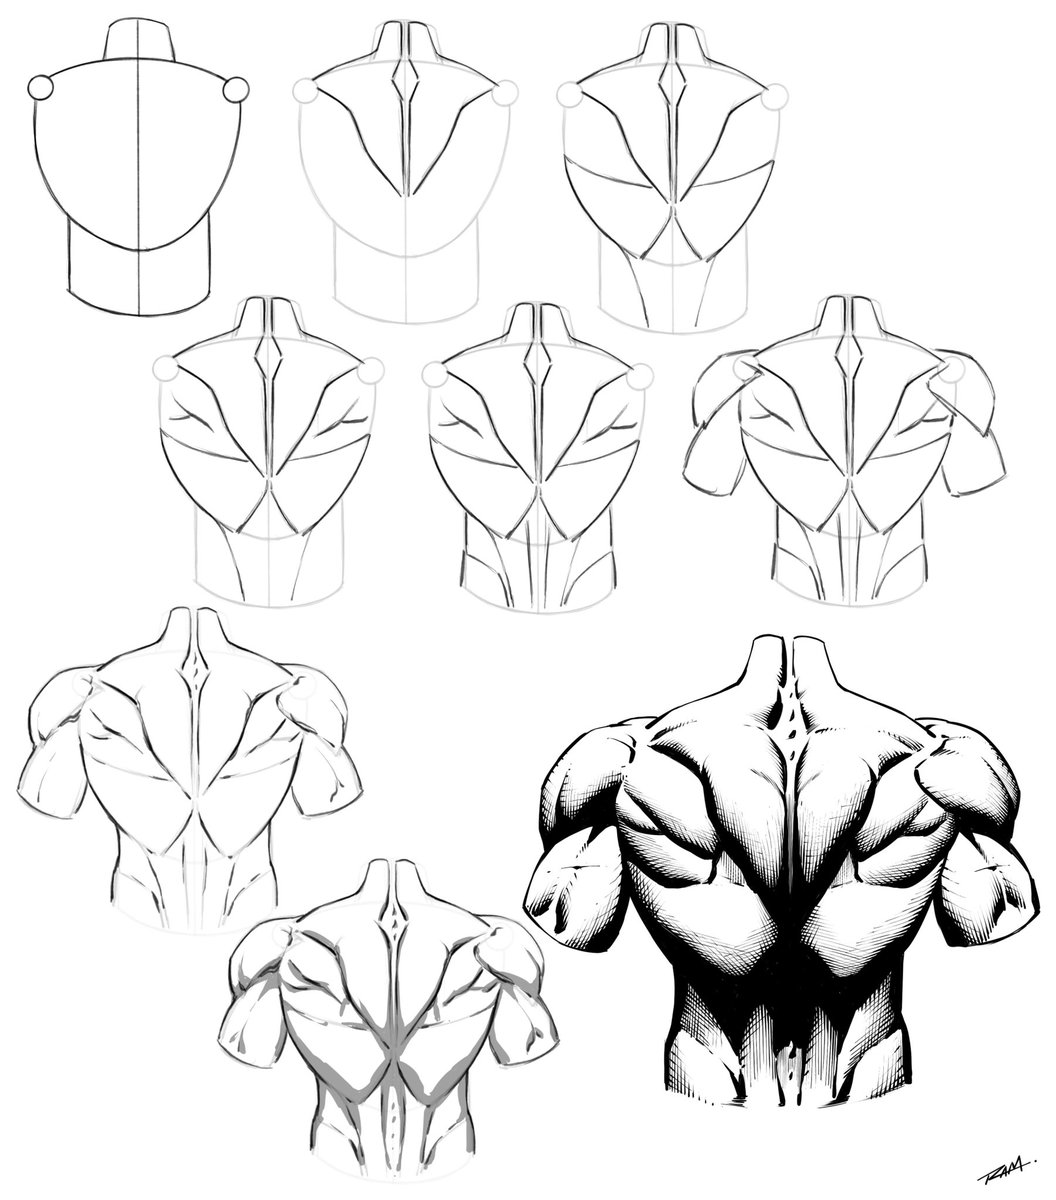 Here is a step by step on drawing the back muscles. I hope it helps and more on the way! 😎🙌✏️ #drawing #anatomy #StepByStep #backmuscles #tutorial